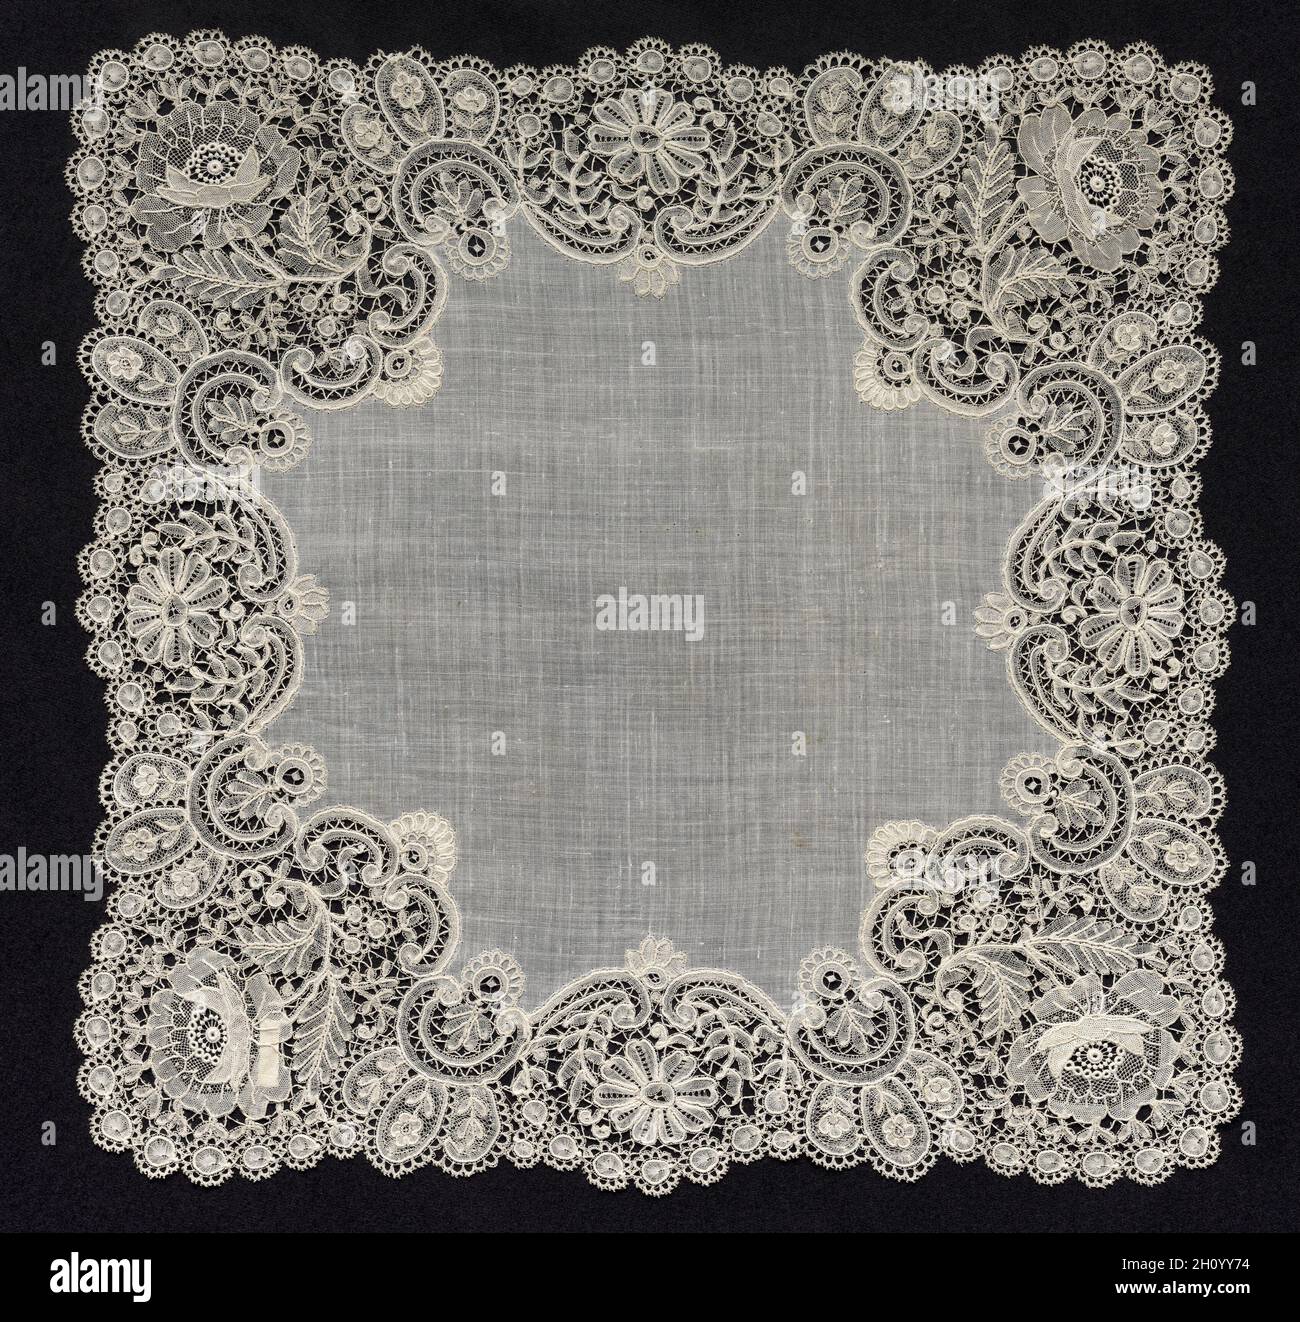 Bobbin (Point Duchesse) and Point Lace Handkerchief, 19th century. Belgium, Brussels, 19th century. Lace, bobbin and point: linen; average: 36.9 x 36.9 cm (14 1/2 x 14 1/2 in.). Stock Photo